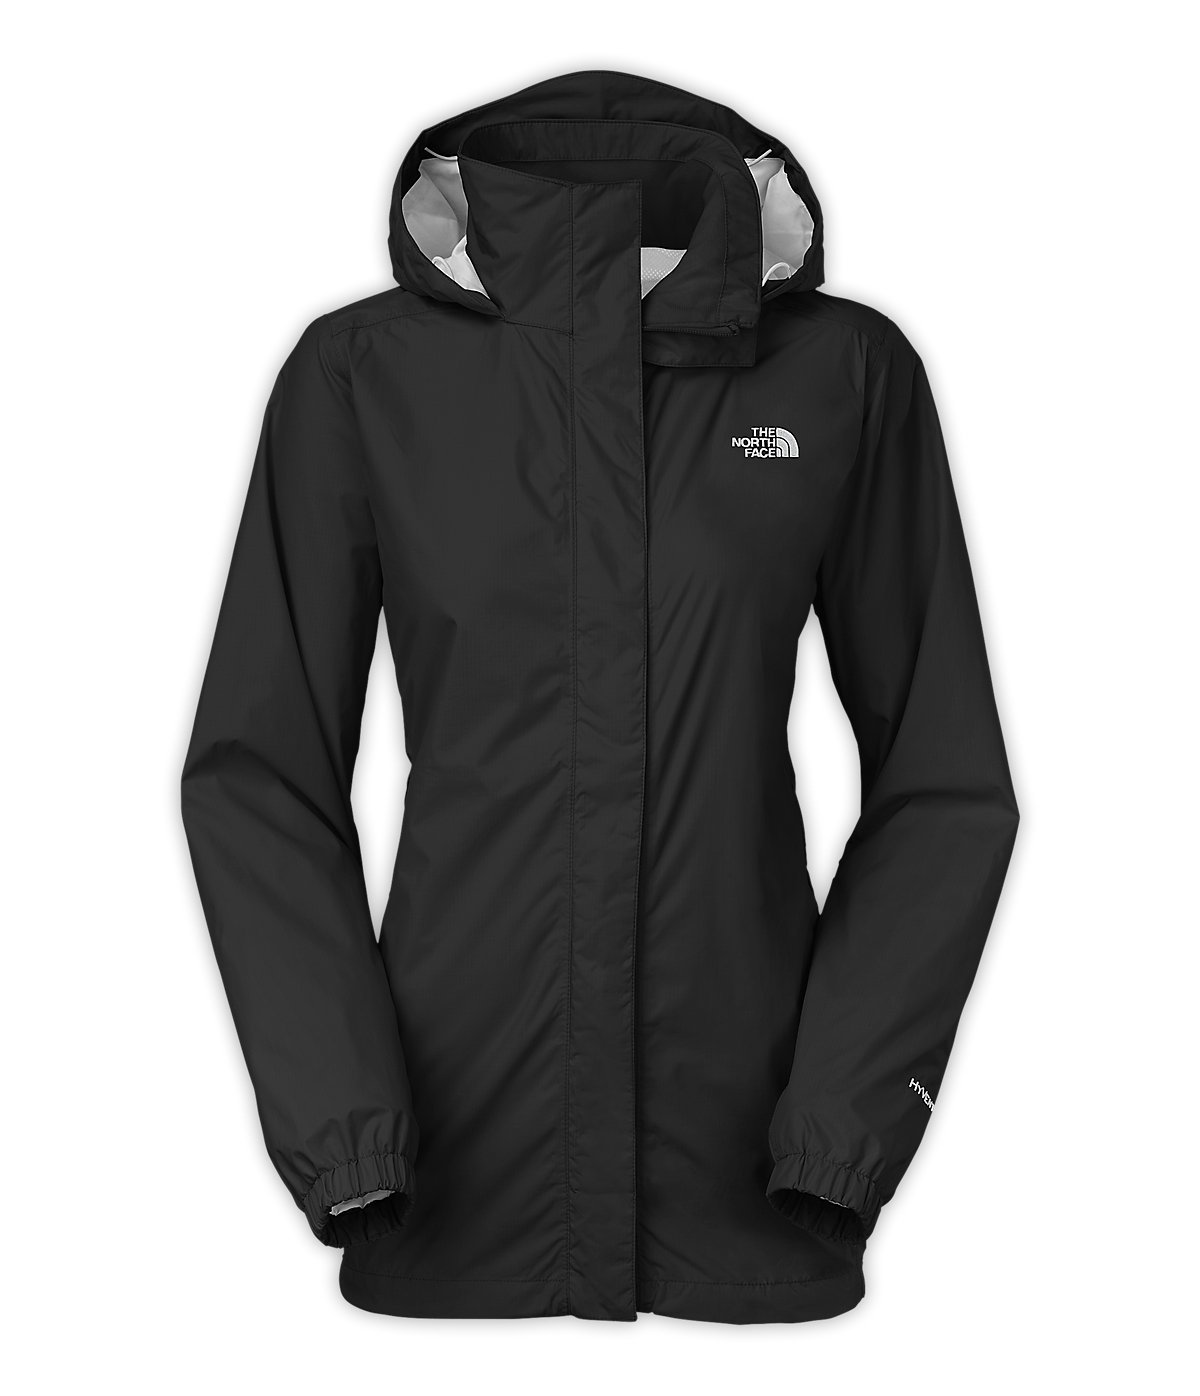 The North Face - Resolve Parka Women's - The North Face 15 : Clothing ...